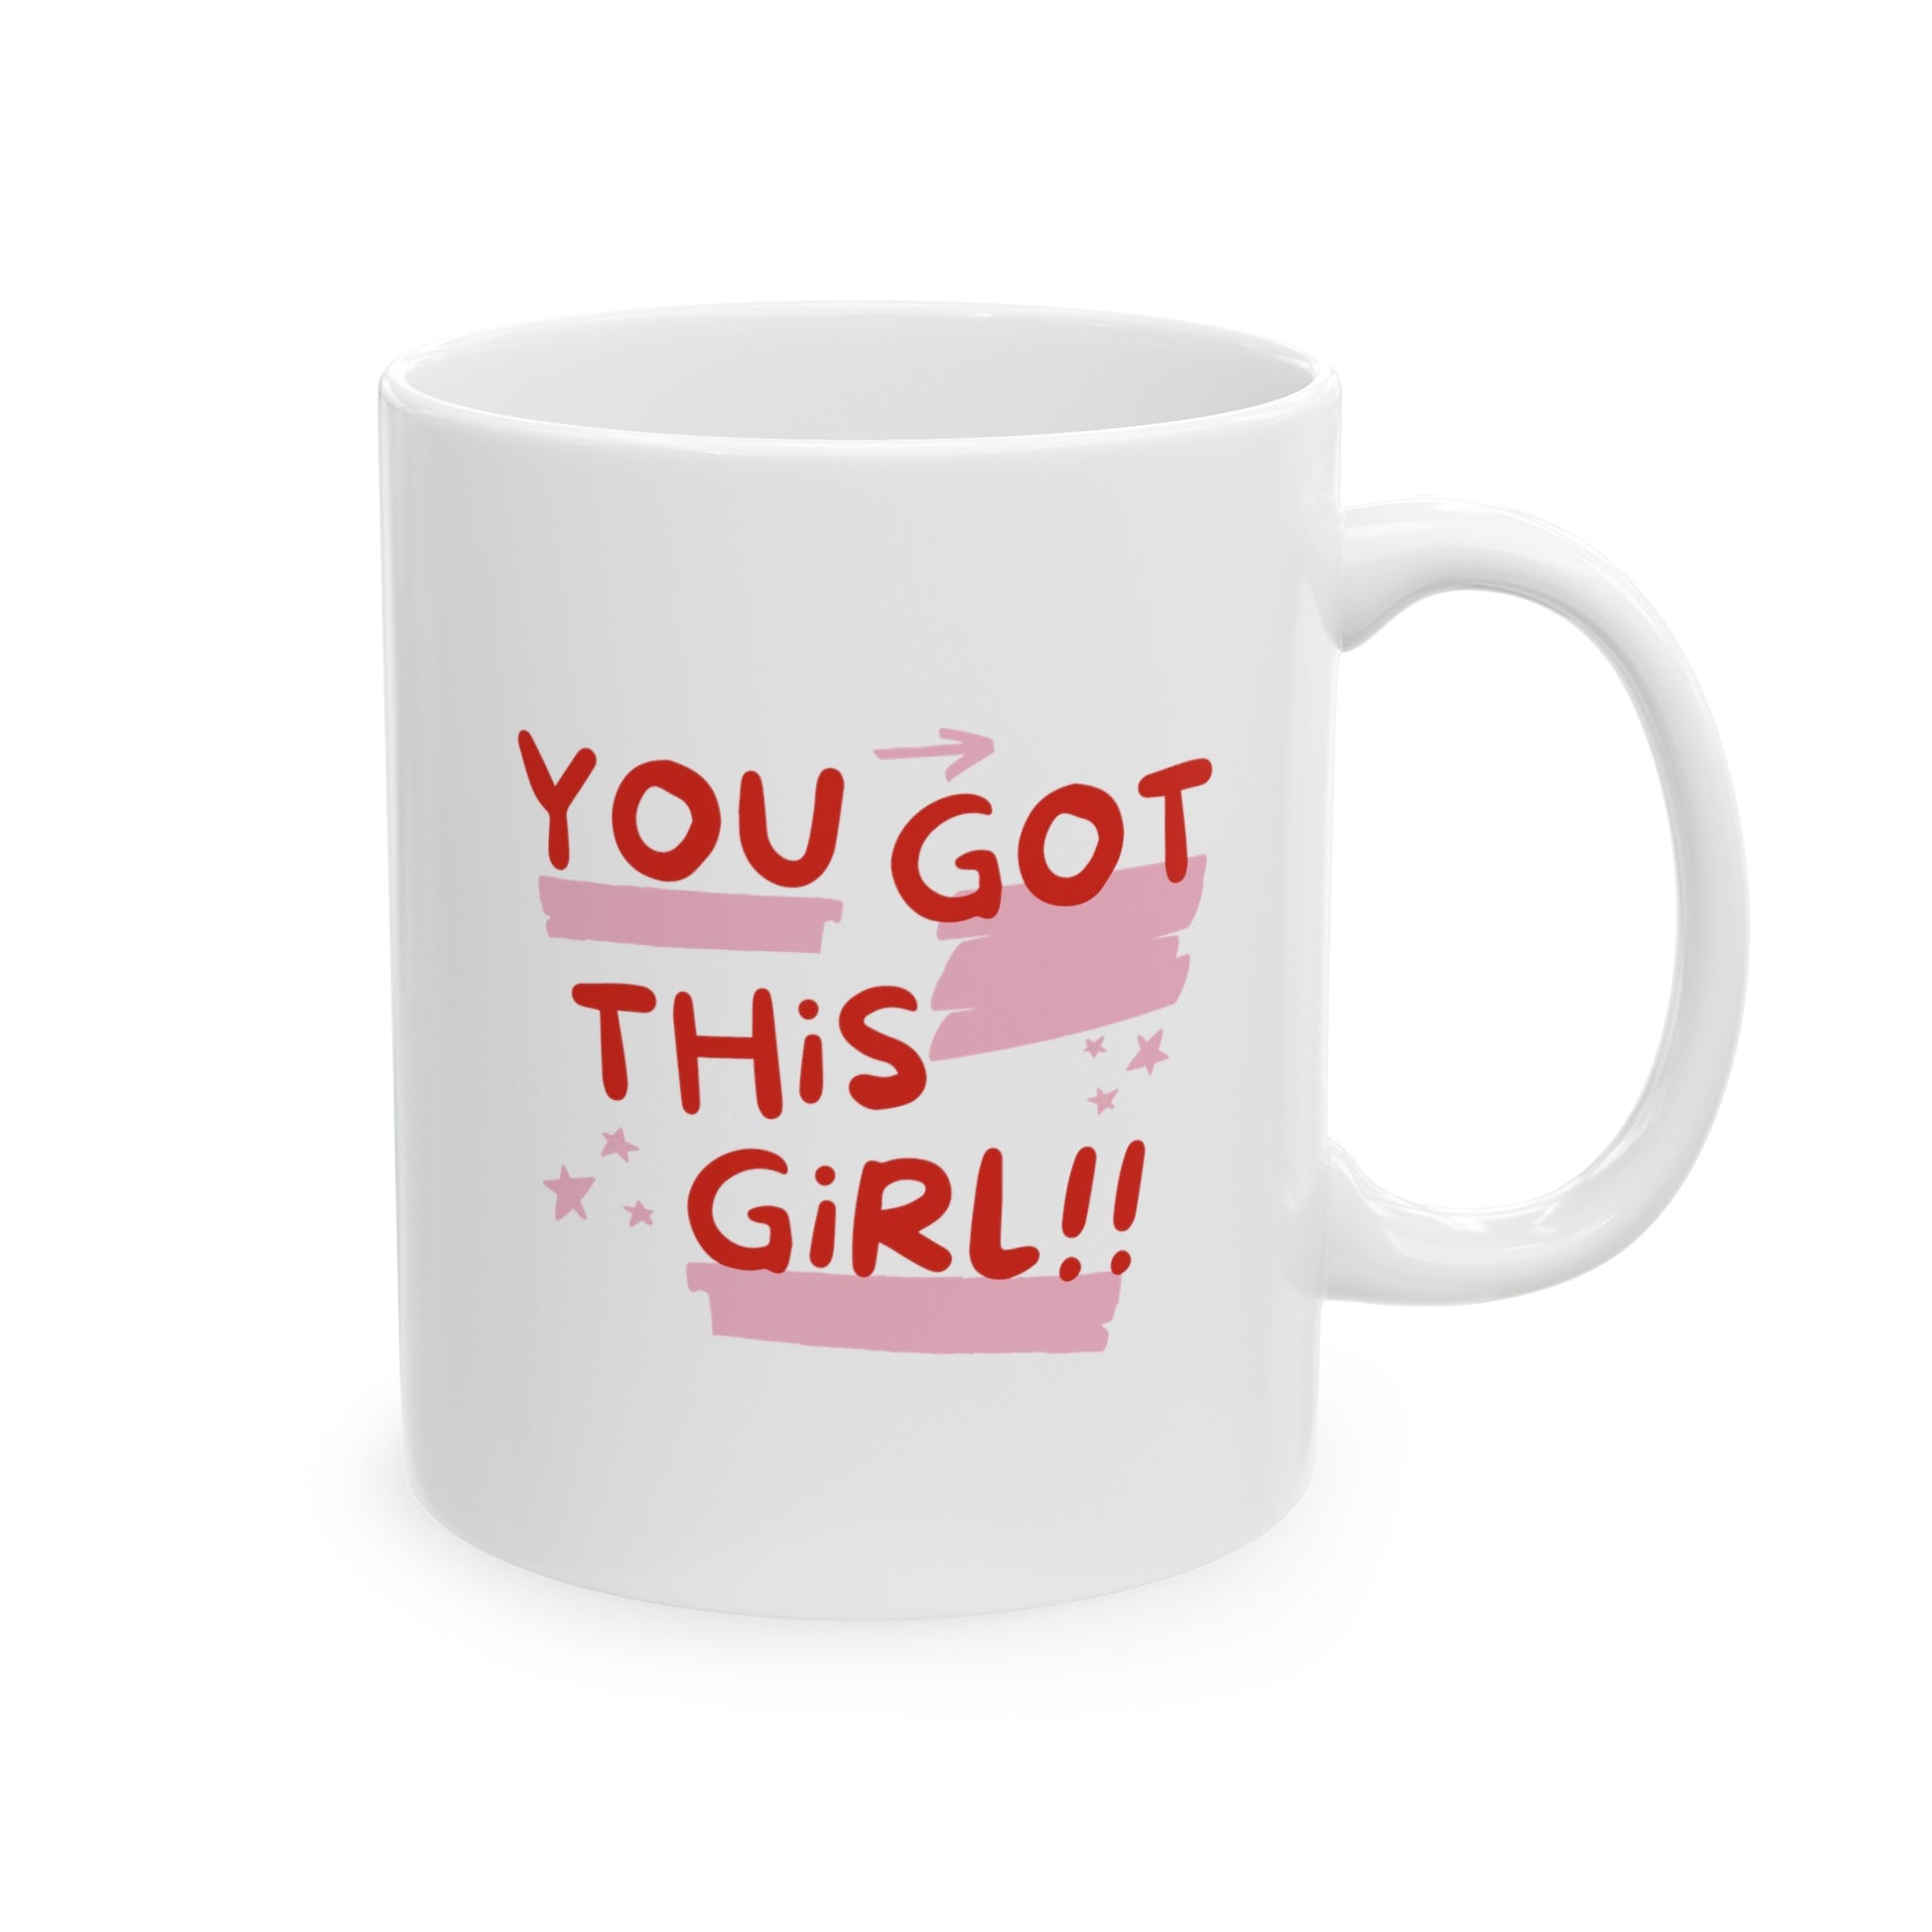 You Got This Girl 11oz white funny large coffee mug gift for BFF motivational positivity quote congratulations exam results friendship new job waveywares wavey wares wavywares wavy wares